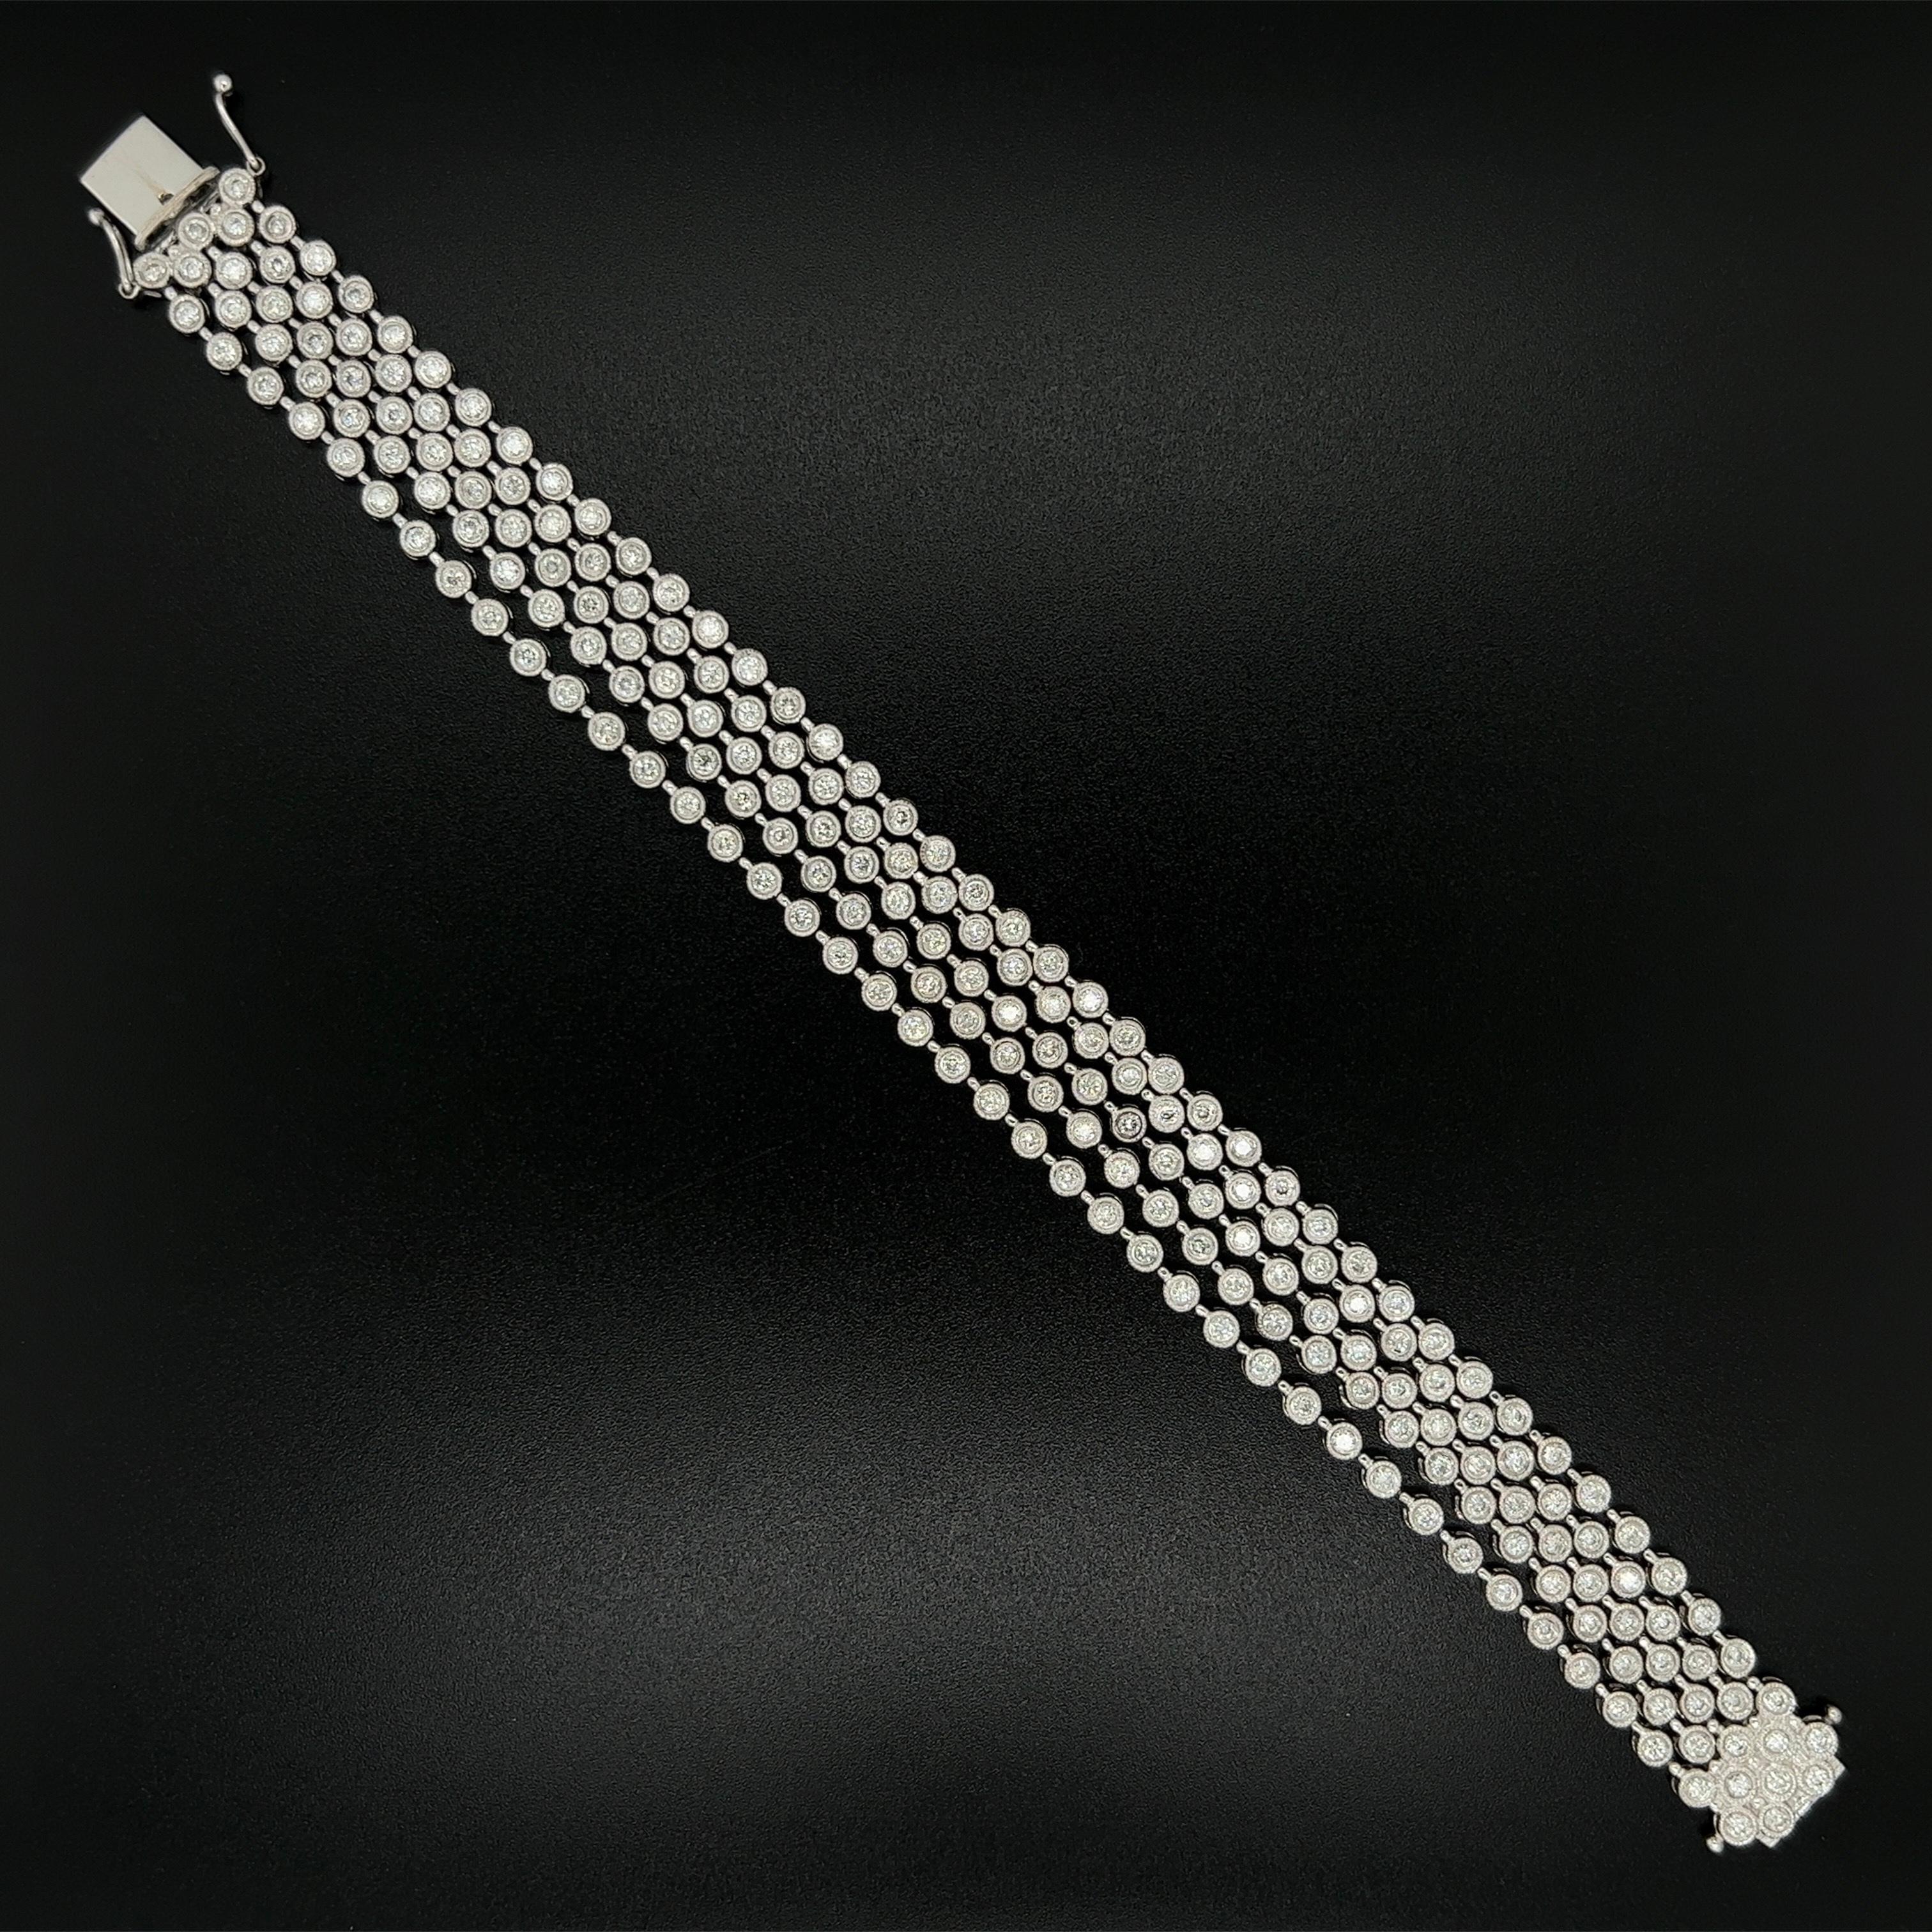 Simply Beautiful! Finely detailed 5 Strand Diamond Bracelet held by a Diamond encrusted clasp. Bezel Hand set with 4.20tcw Diamonds. Measuring approx. 7” l x 0.50” w. Hand crafted in 18K White Gold. More Beautiful in real time...A piece you’ll turn